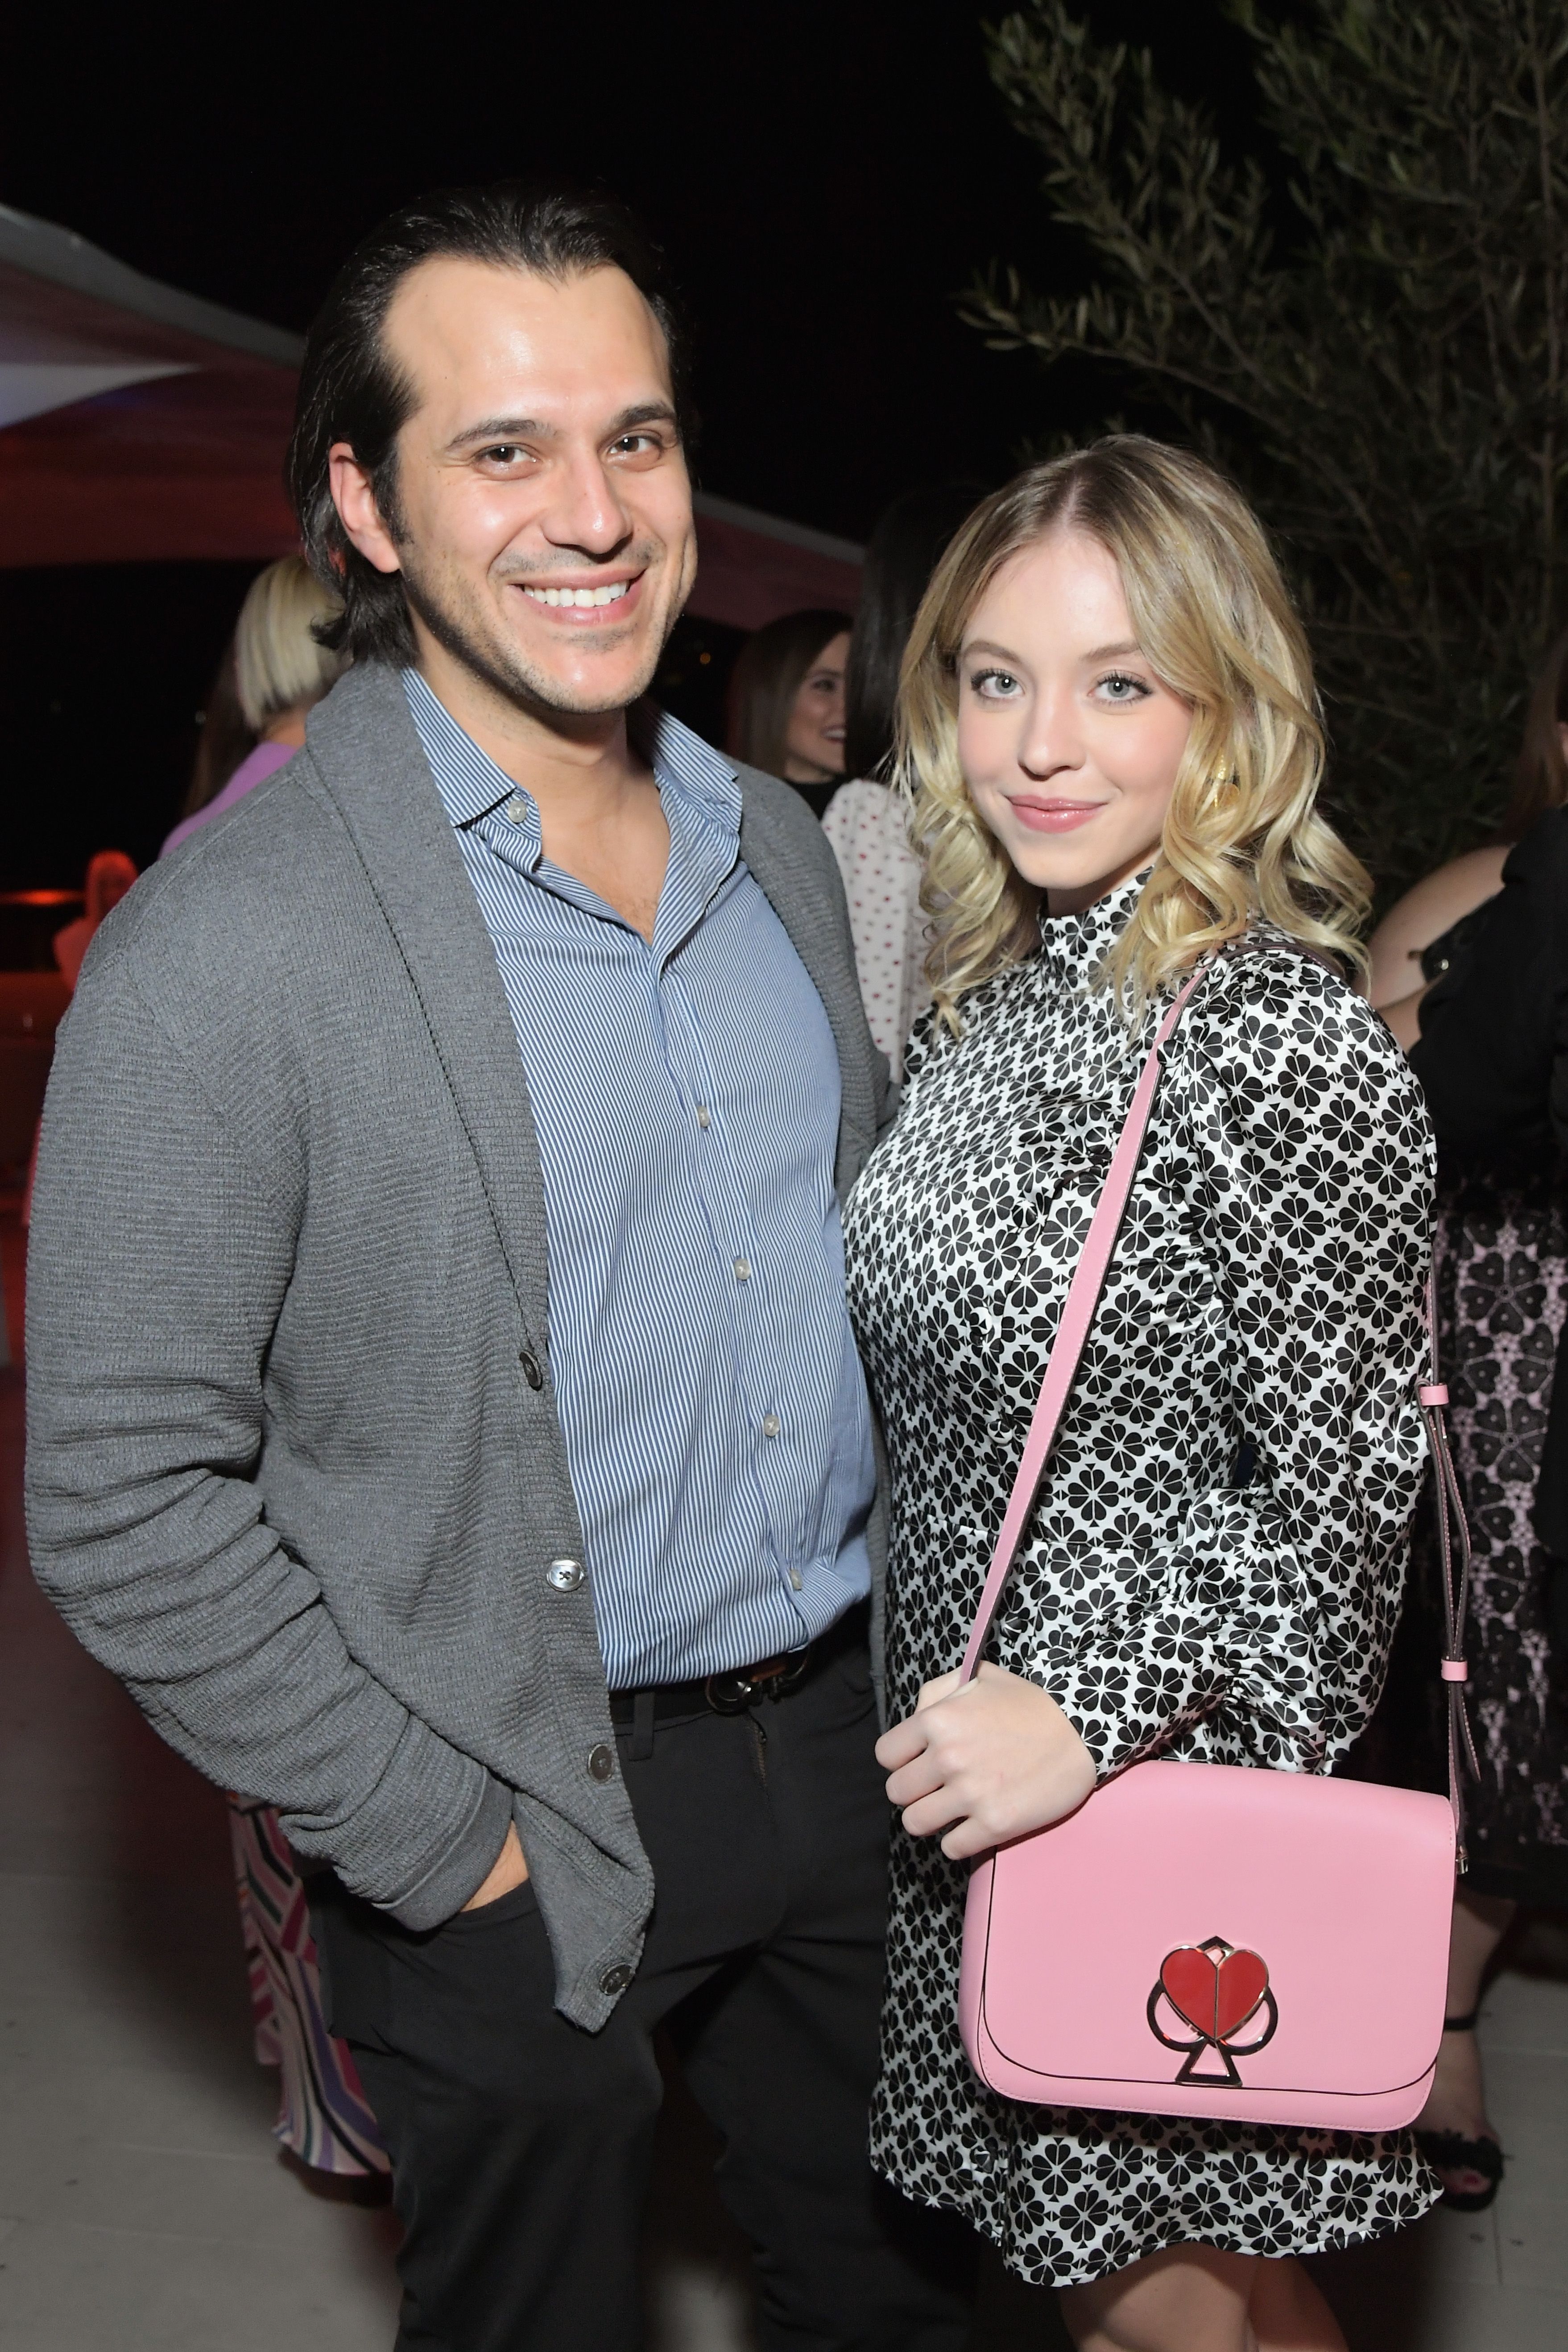 Jonathan Davino and Sydney Sweeney during the InStyle and Kate Spade dinner at Spring Place on October 23, 2018 in Los Angeles, California. | Source: Getty Images